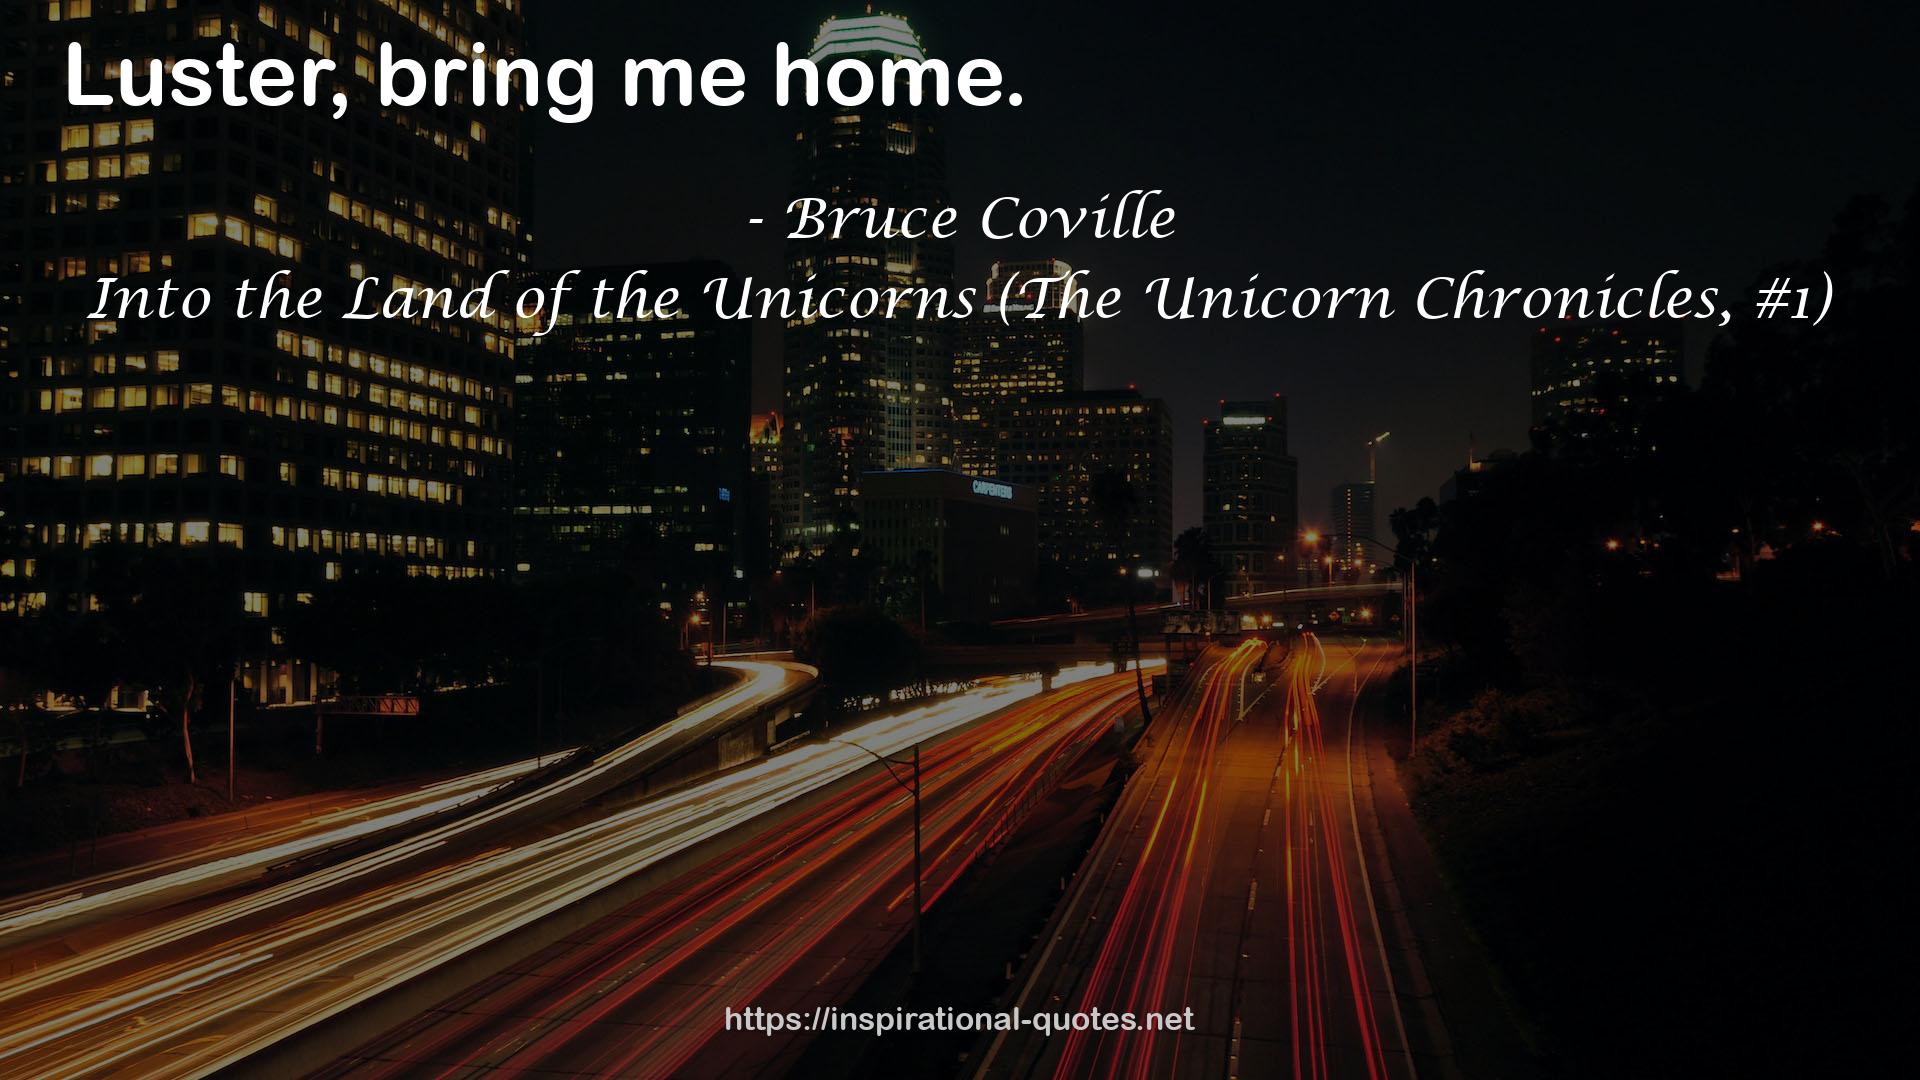 Into the Land of the Unicorns (The Unicorn Chronicles, #1) QUOTES